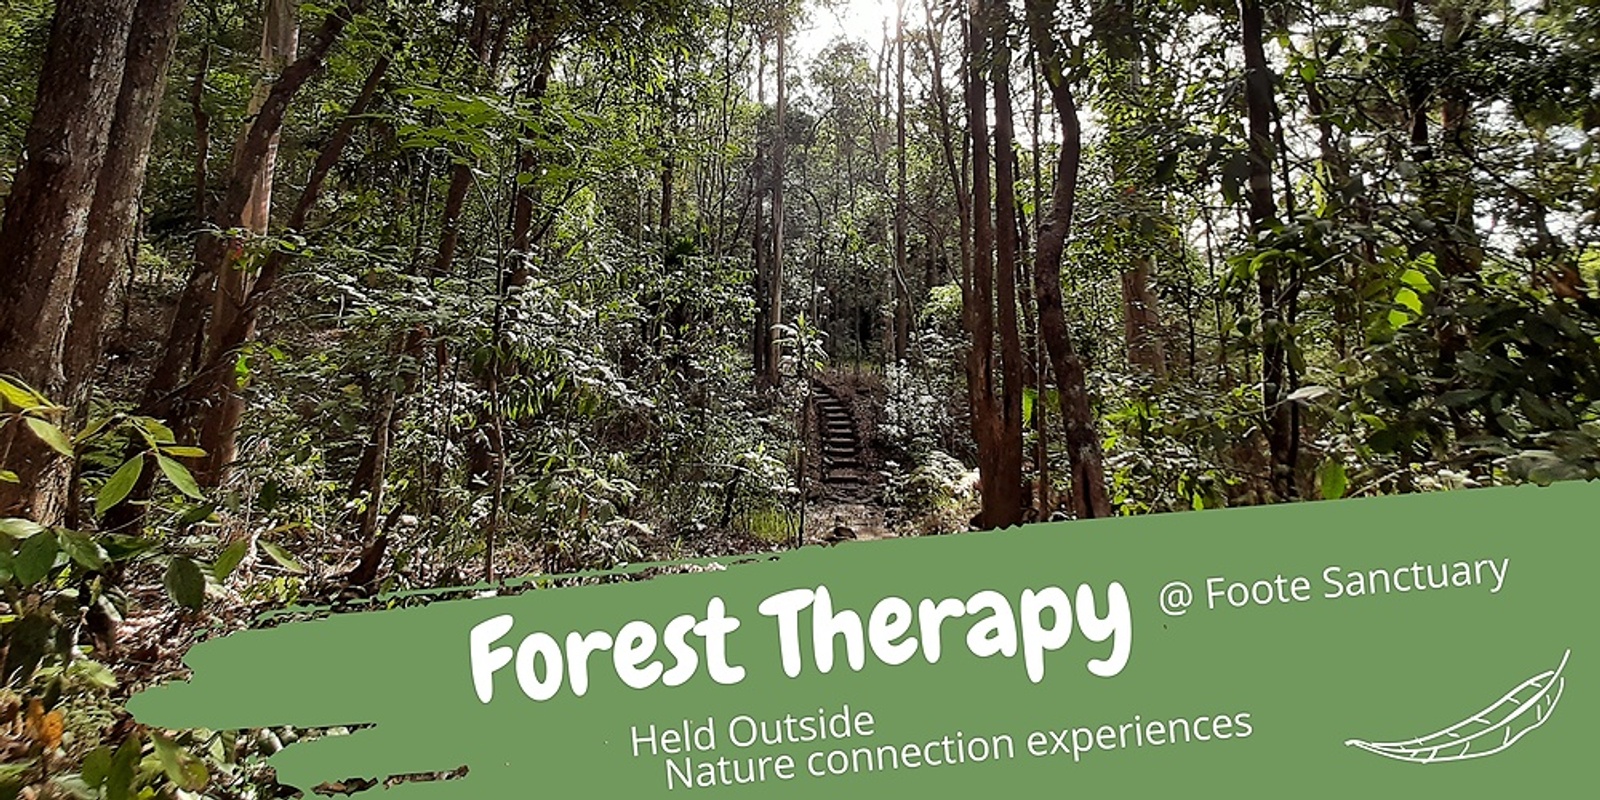 Forest Therapy at Foote Sanctuary 14 Jun 23